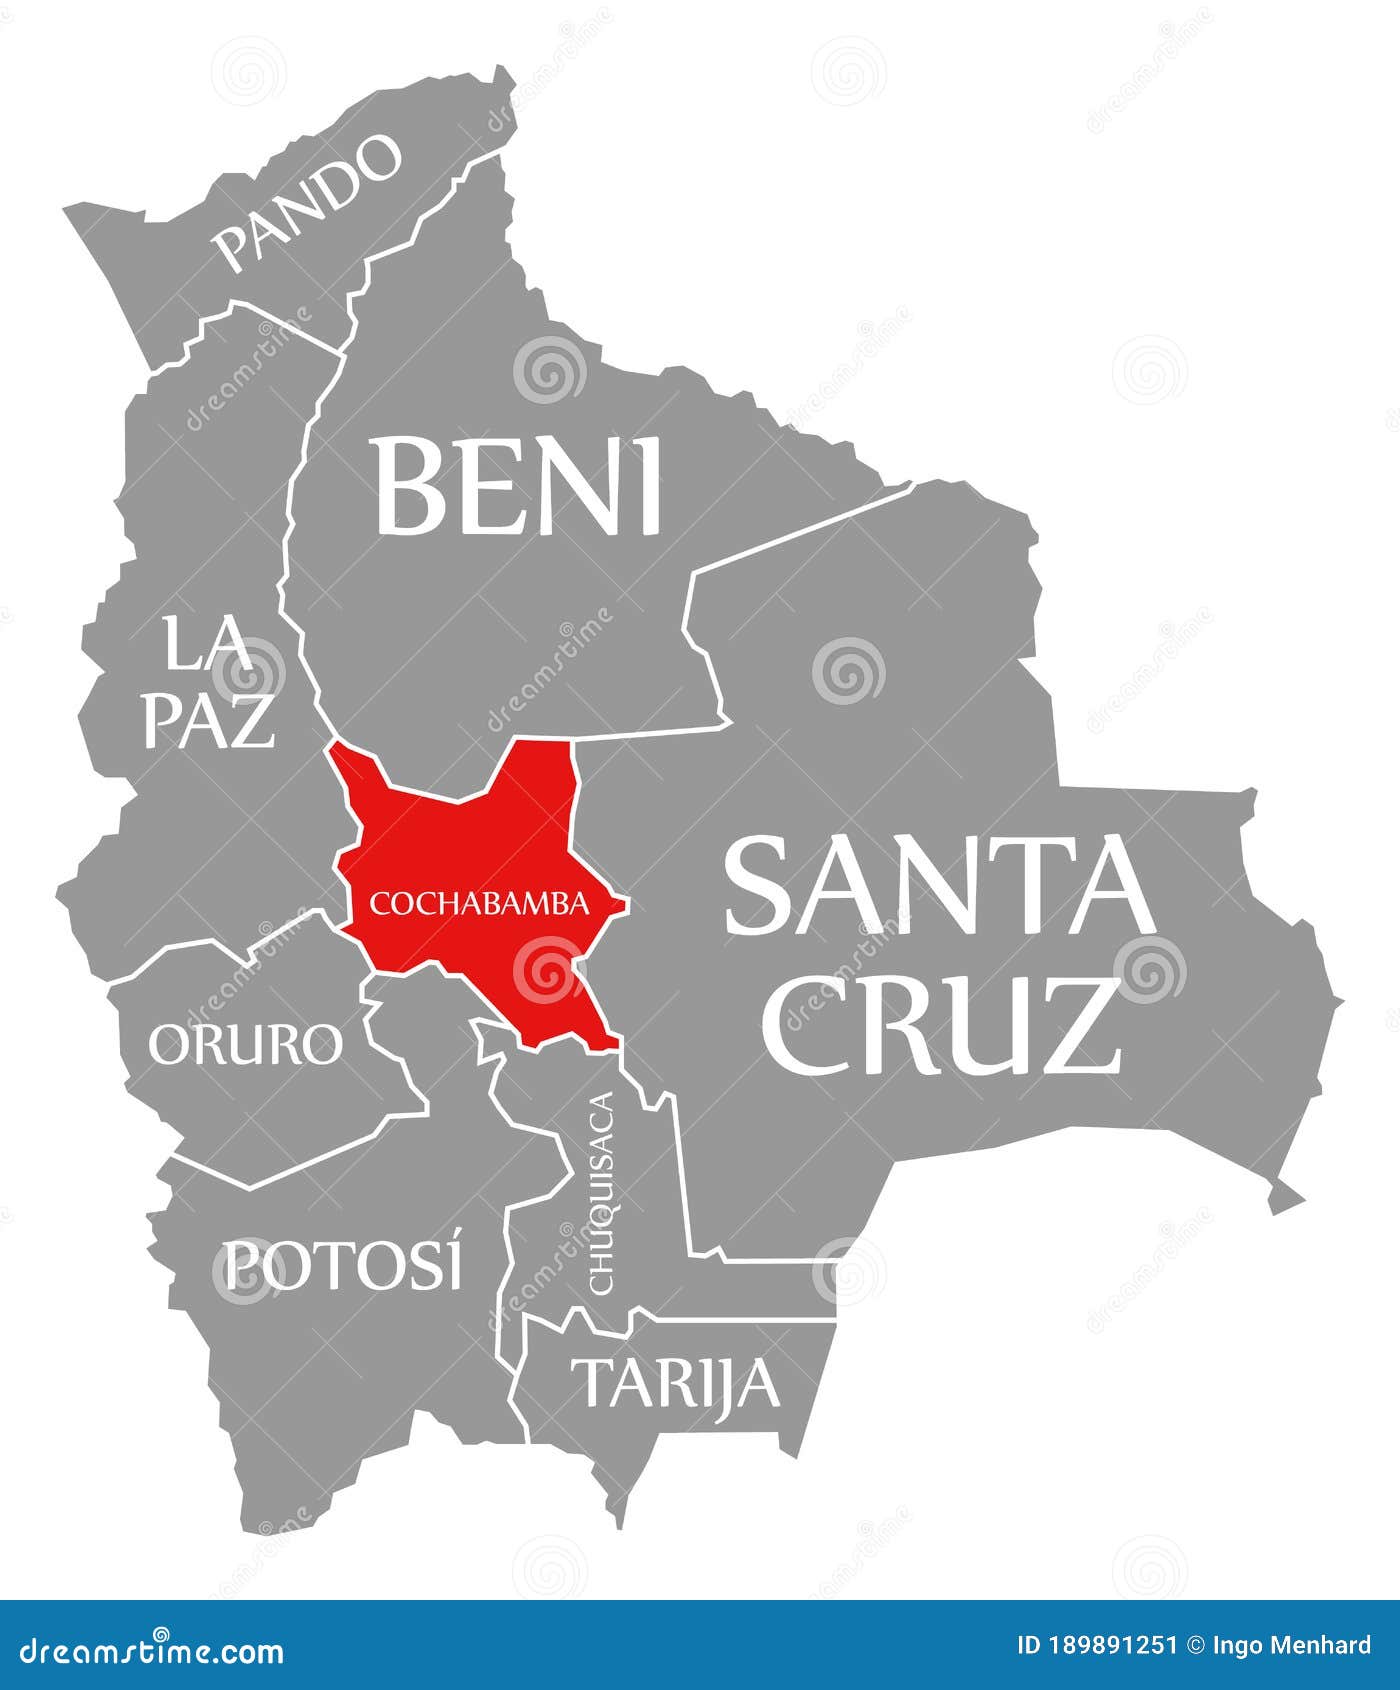 cochabamba red highlighted in map of bolivia